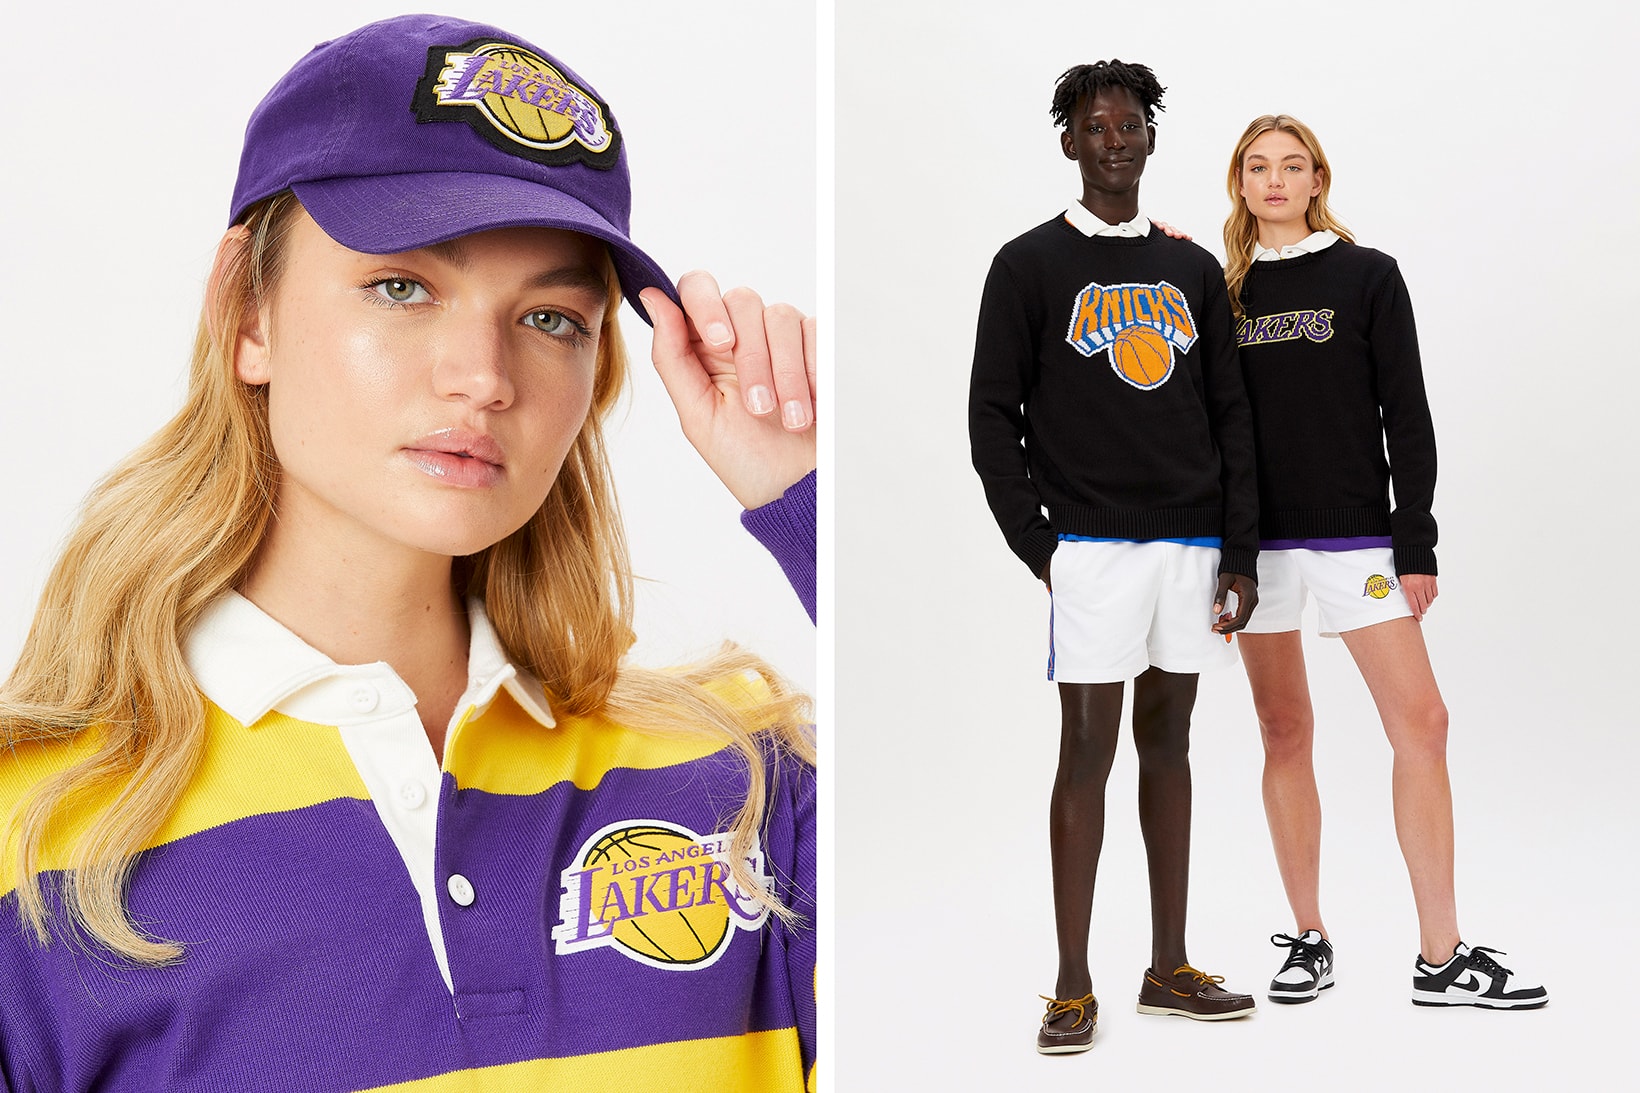 This Rowing Blazers x NBA collaboration is a next-level preppy affair